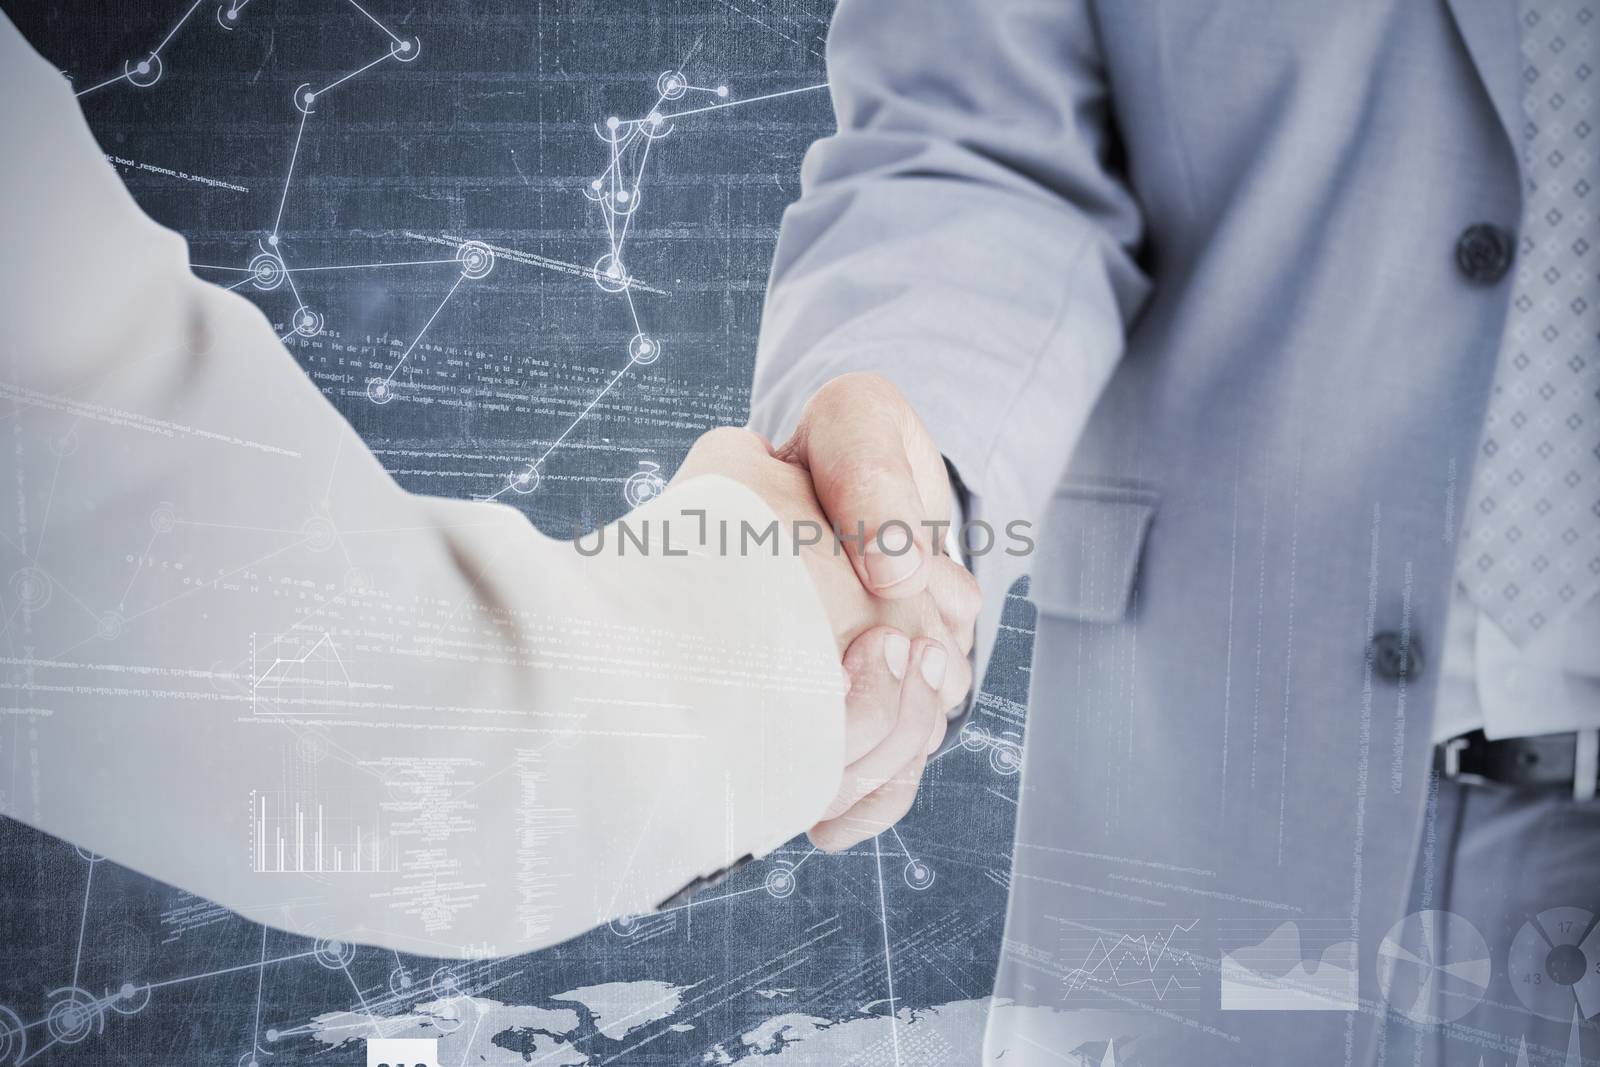 Composite image of people in suit shaking hands by Wavebreakmedia